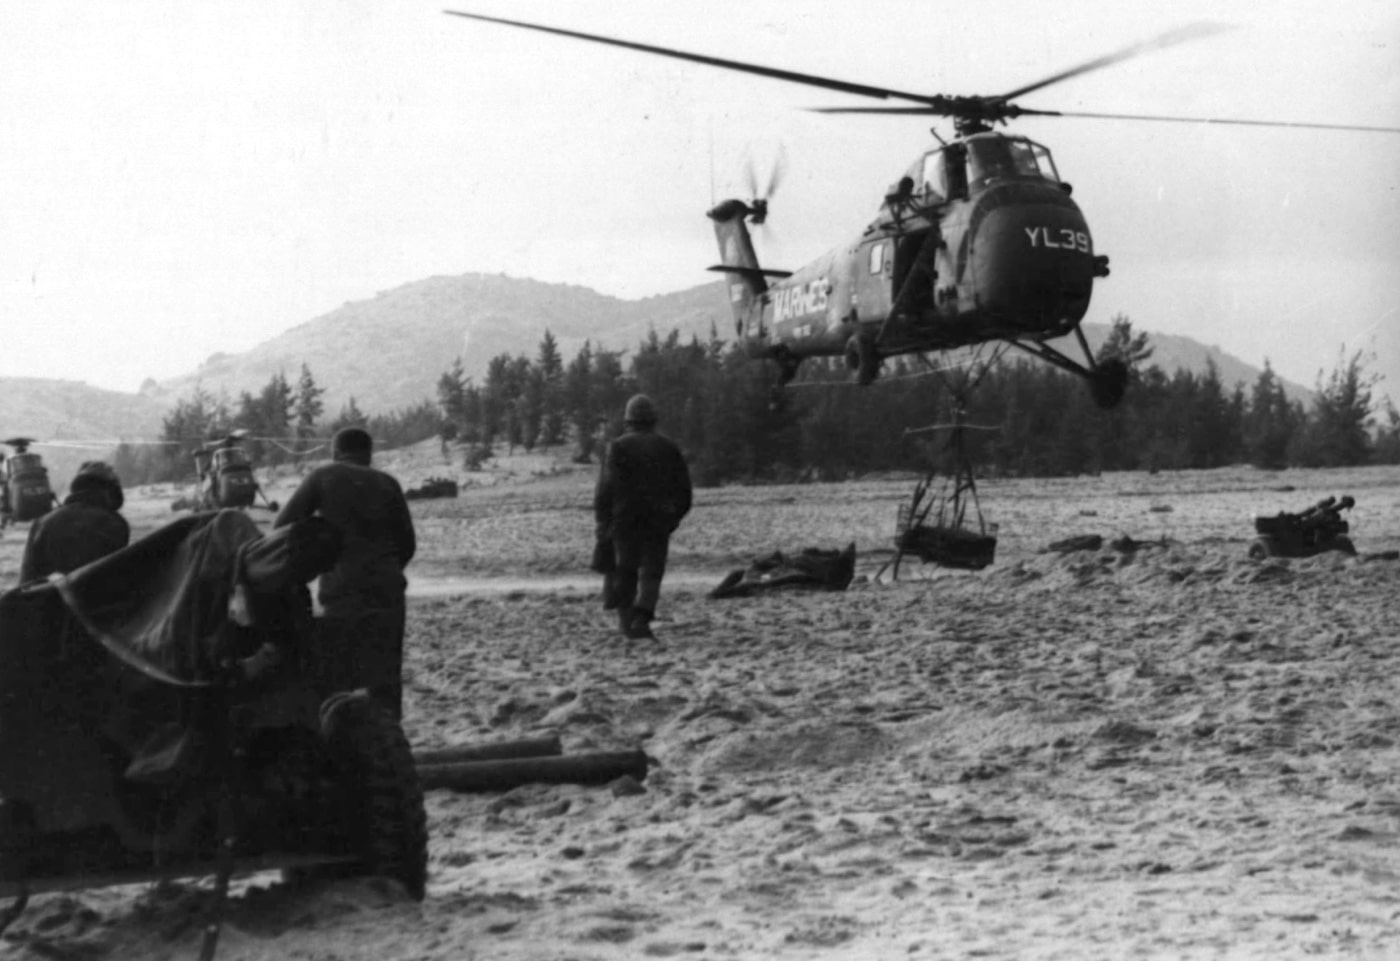 In this image from the United States Marine Corps archives, we see a Sikorsky UH-34 helicopter delivering food and ammunition to troops during combat operations in the Vietnam War. As a military helicopter, the H-34 was nearly obsolete. However the U.S.M.C. and South Vietnamese used the helos extensively throughout the conflict. Additionally, the United States Air Force was known to use them for search and rescue helicopters when searching for downed pilots.